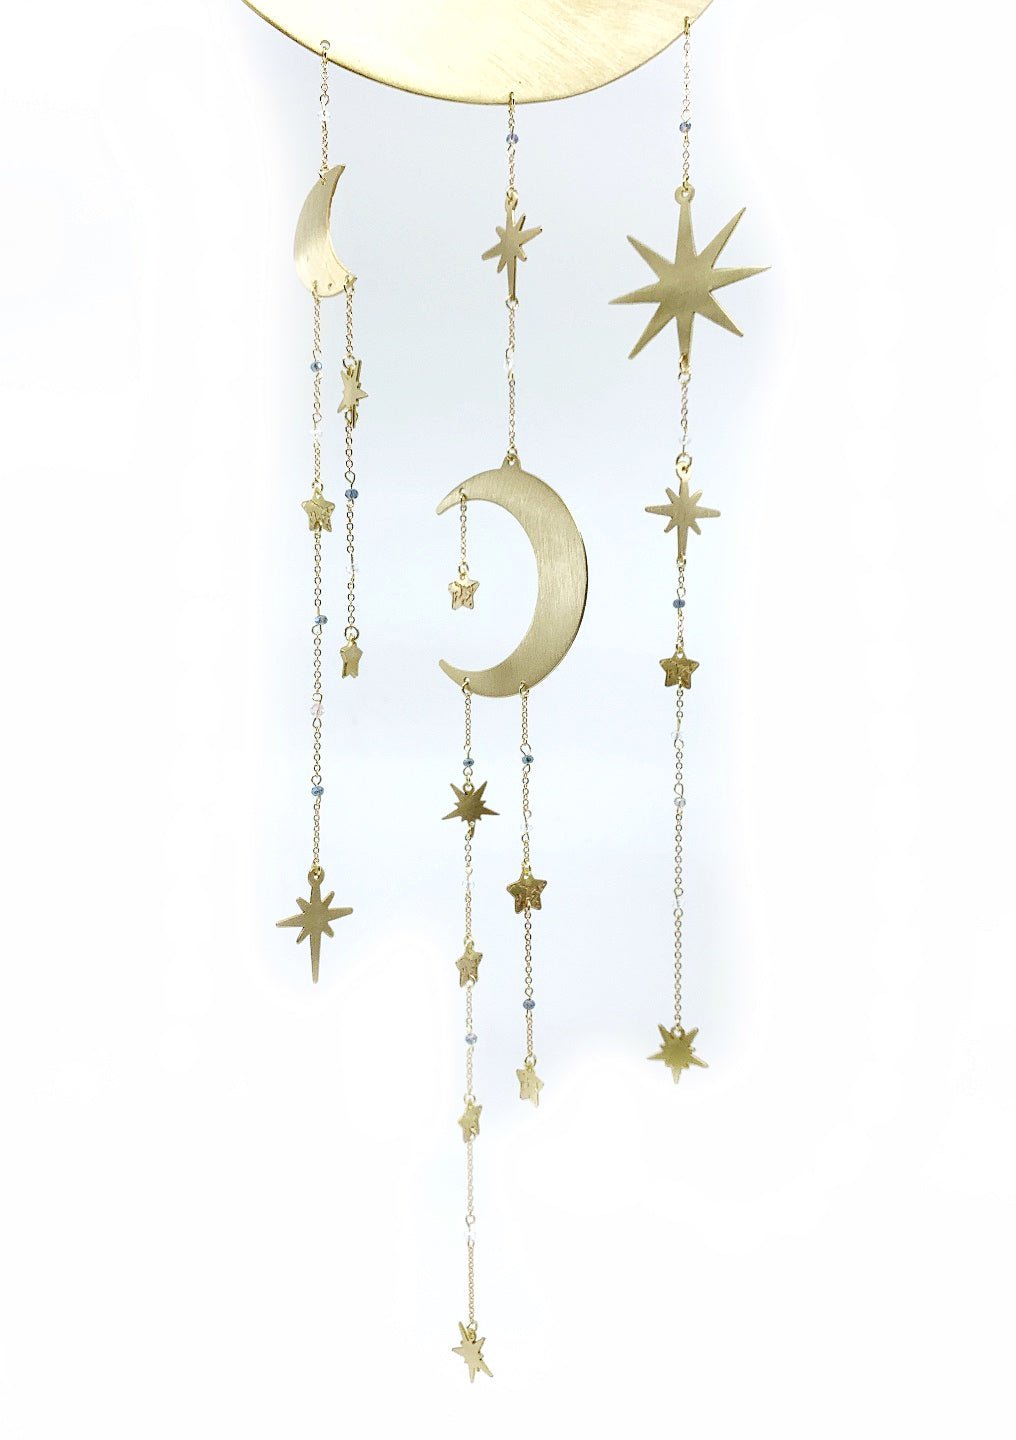 Starry Night Celestial Moon and Star Dreamcatcher by Ariana Ost